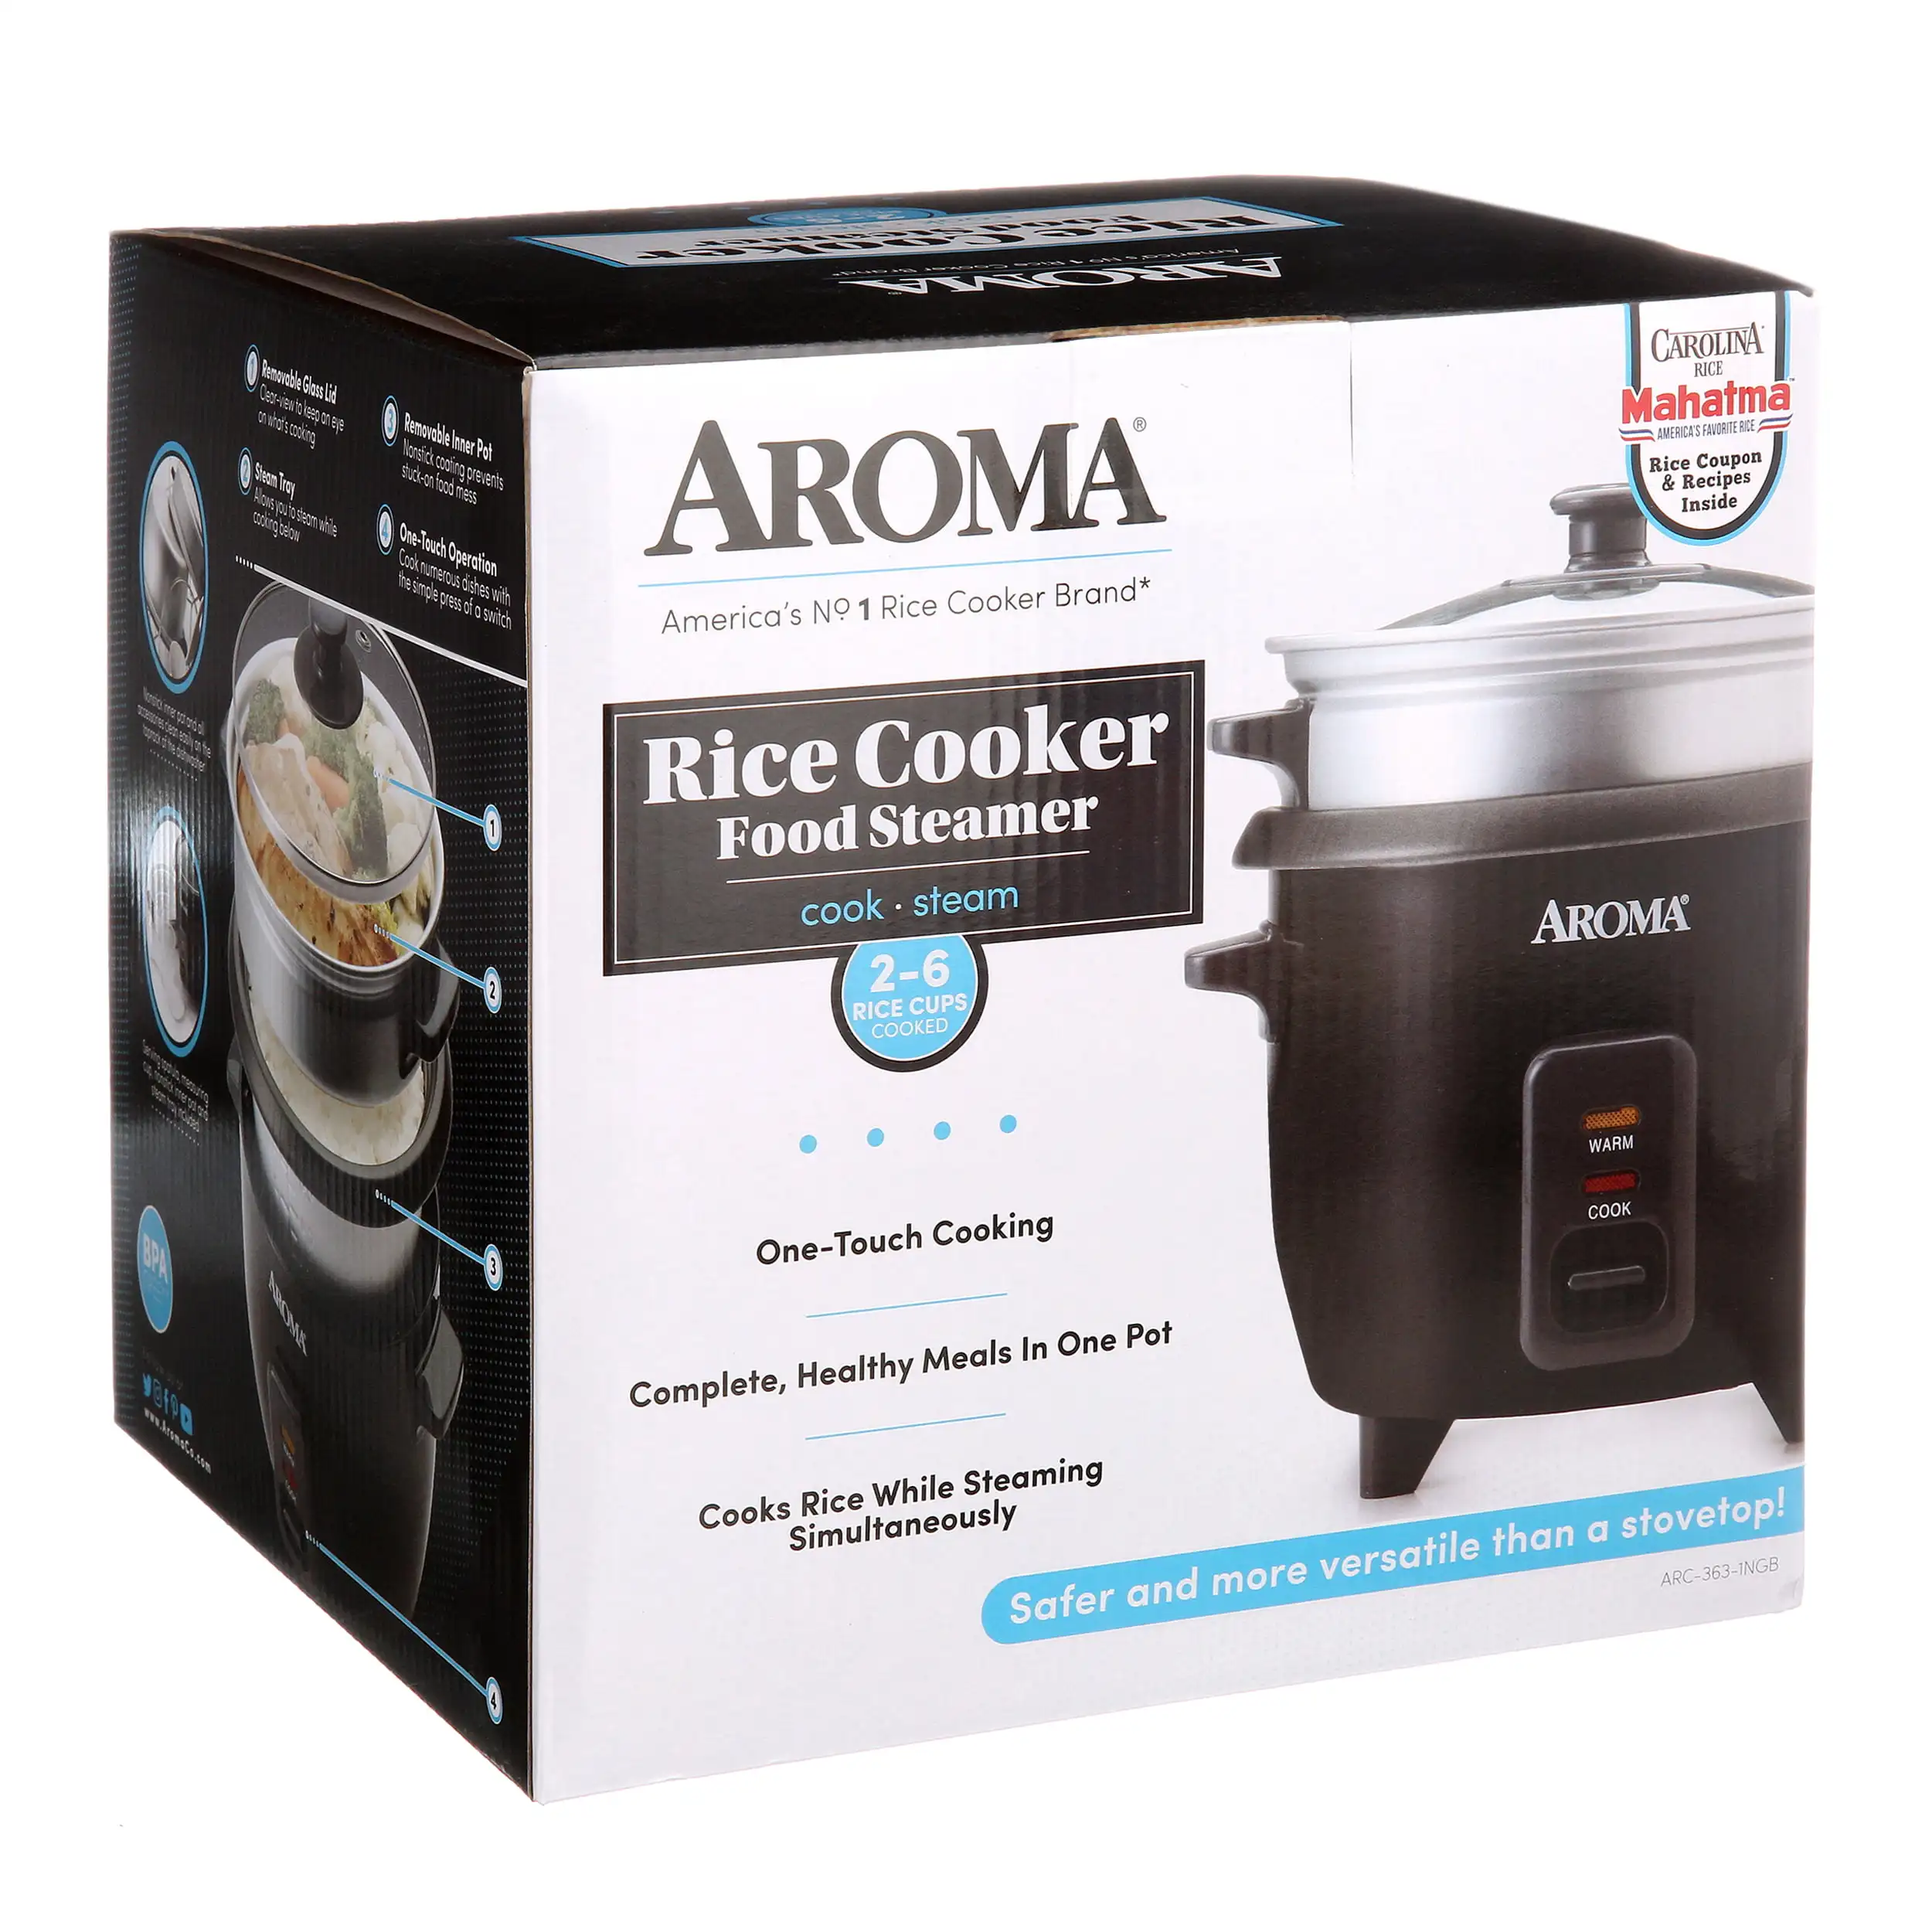 AROMA 6-Cup Black Rice Cooker with Removable Steam Tray ARC-363